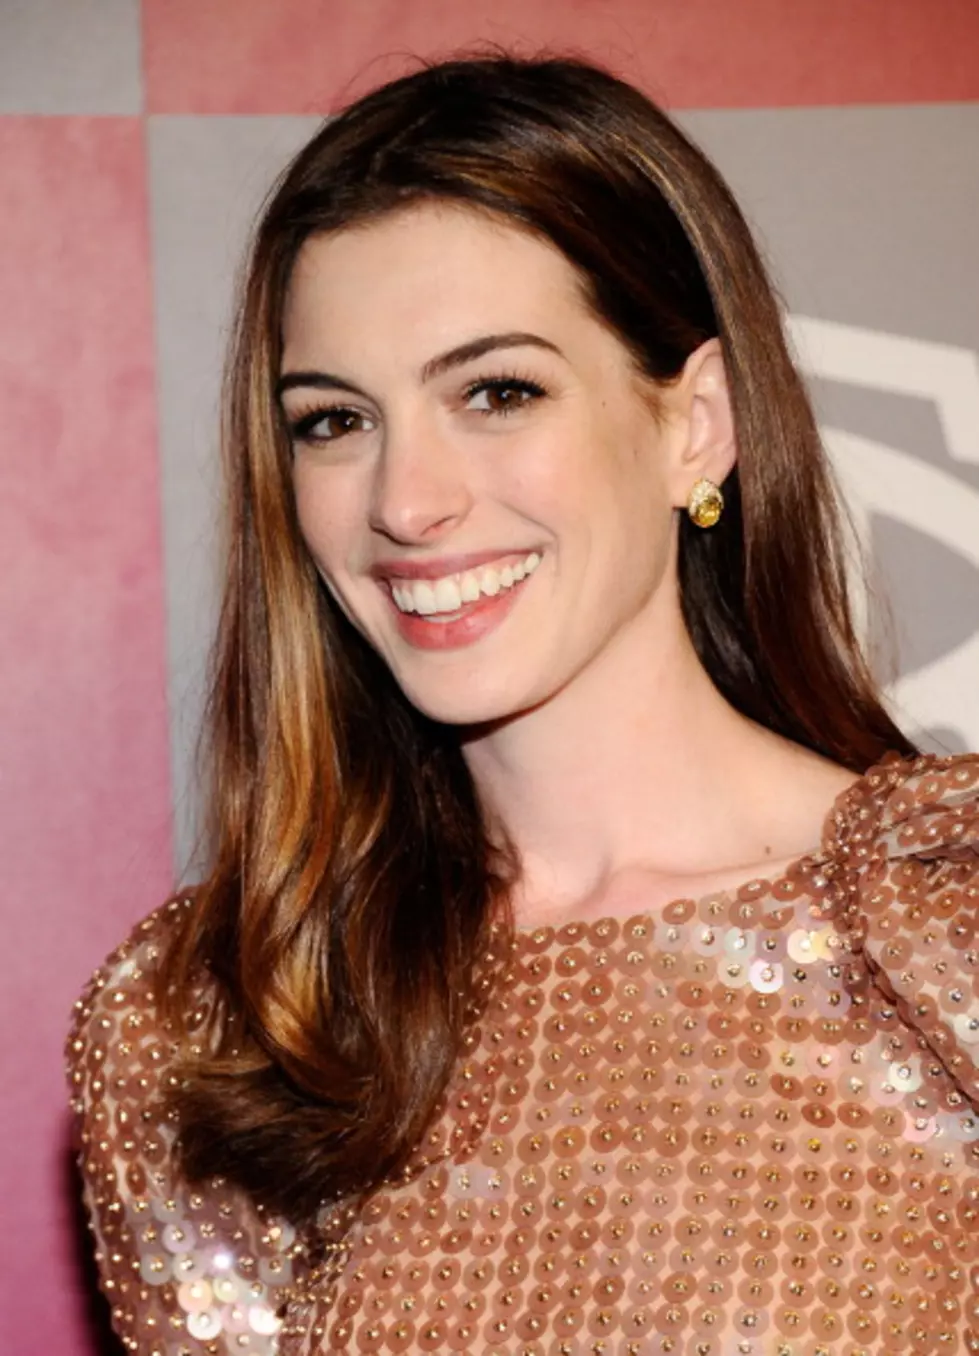 Anne Hathaway to Guest Star on “Glee”